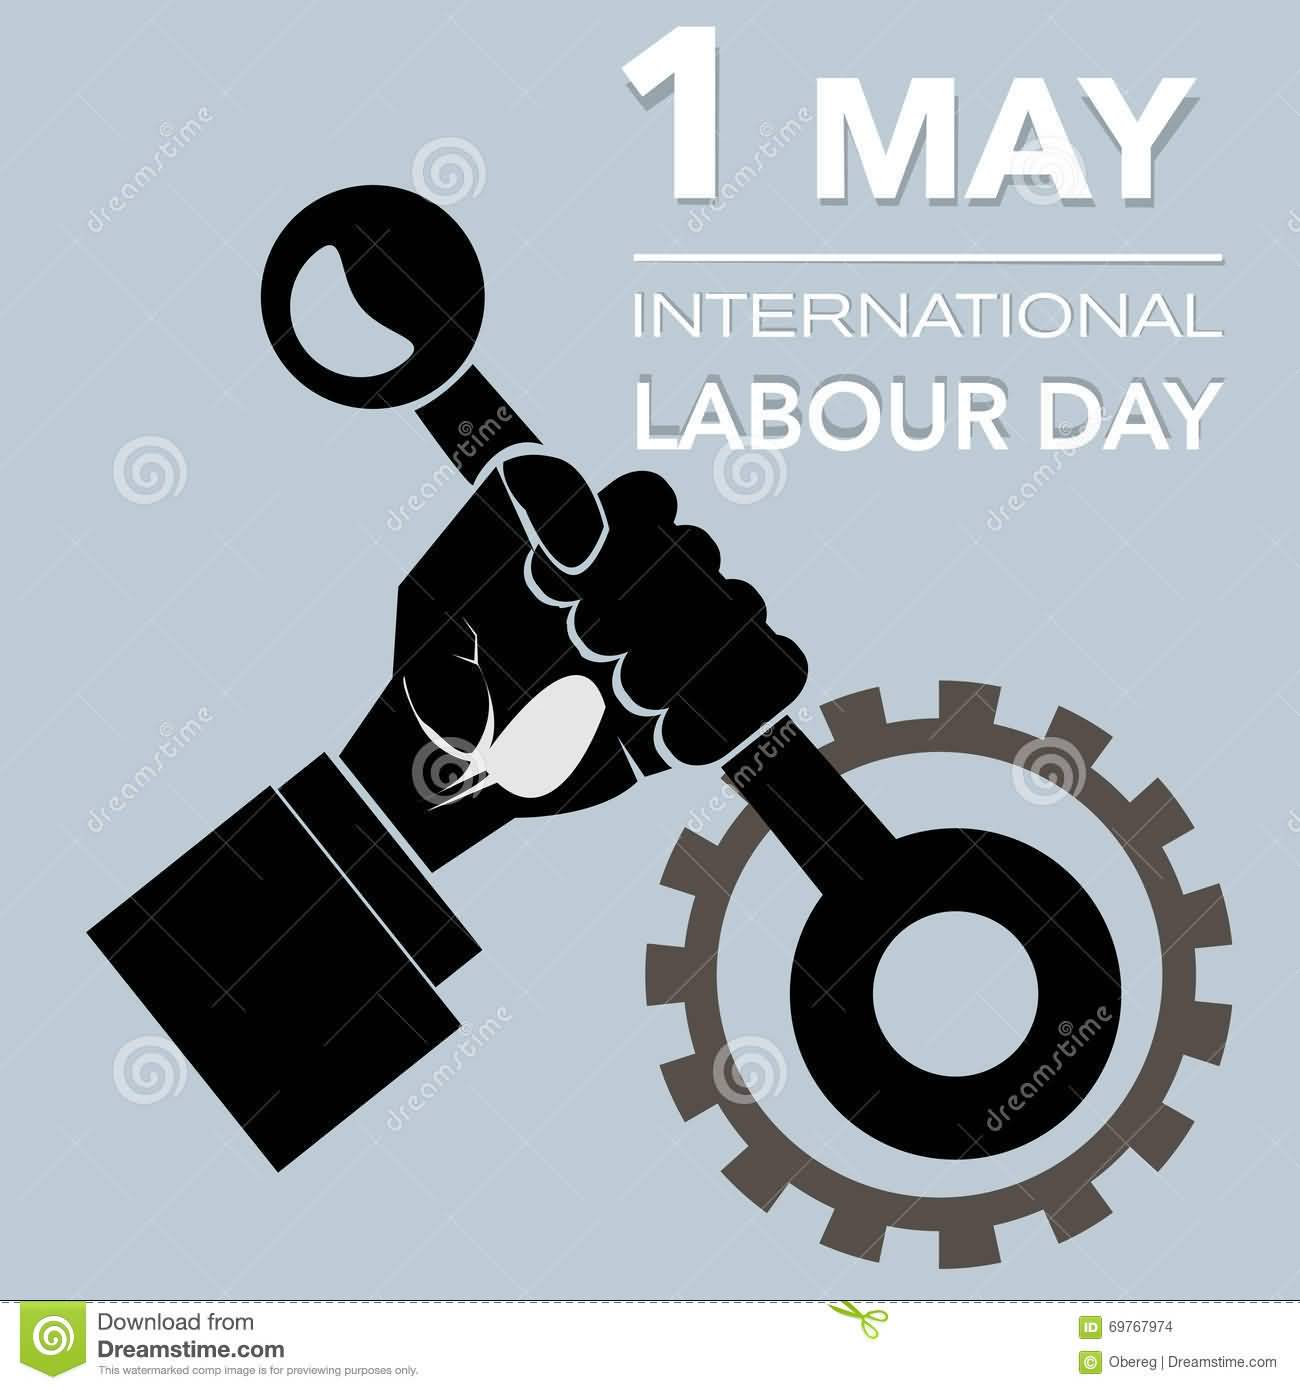 1 May International Labour Day Outline Hand With Lever Illustration